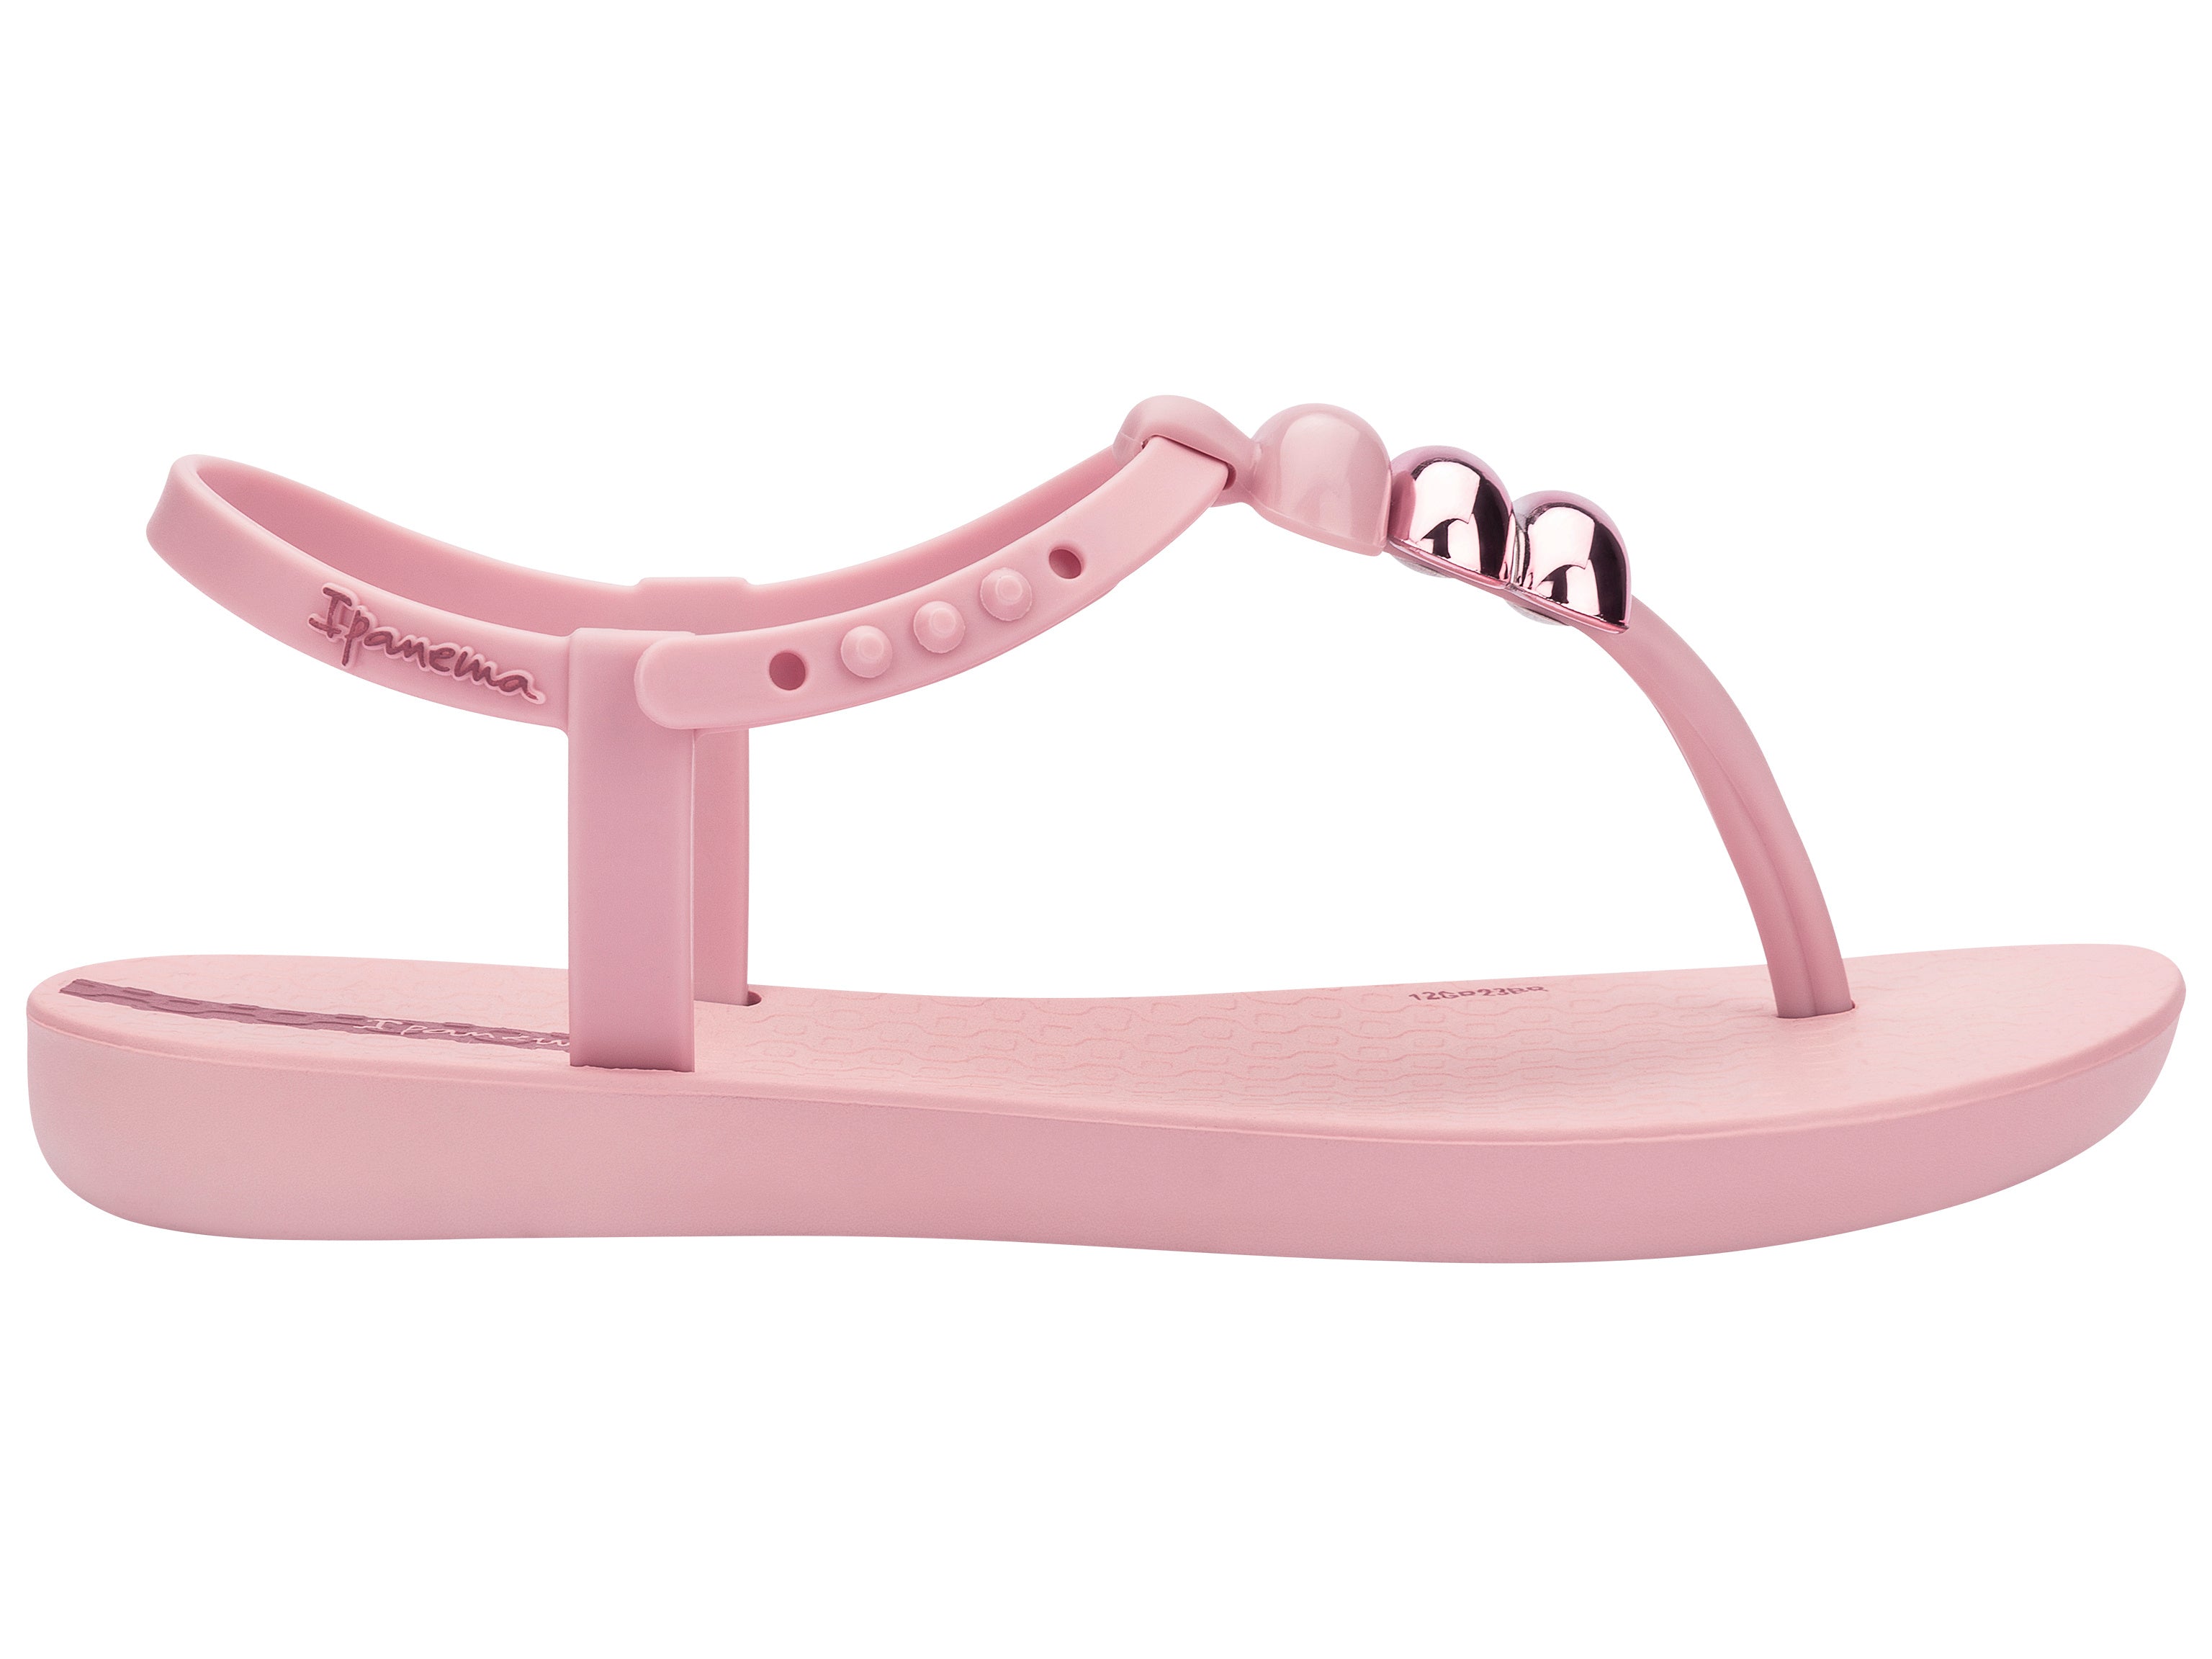 Outer side view of a light pink Ipanema Class kids' t-strap sandal with 3 baubles on the strap.